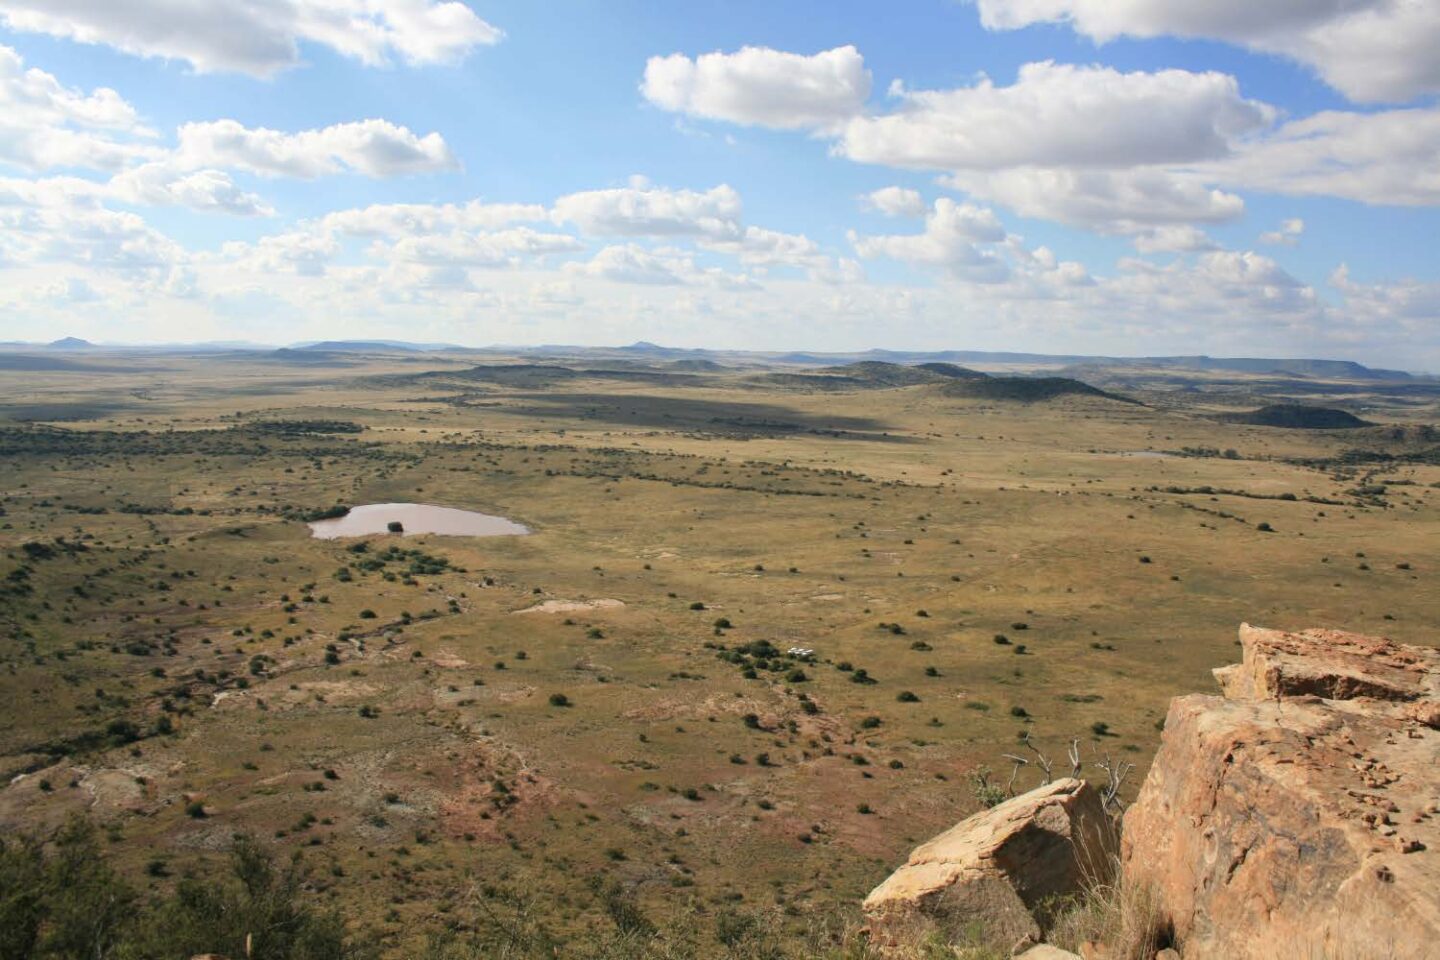 Fairydale, bethulie is one of the extensively studied permo-triassic boundary sites in south africa's karoo basin.